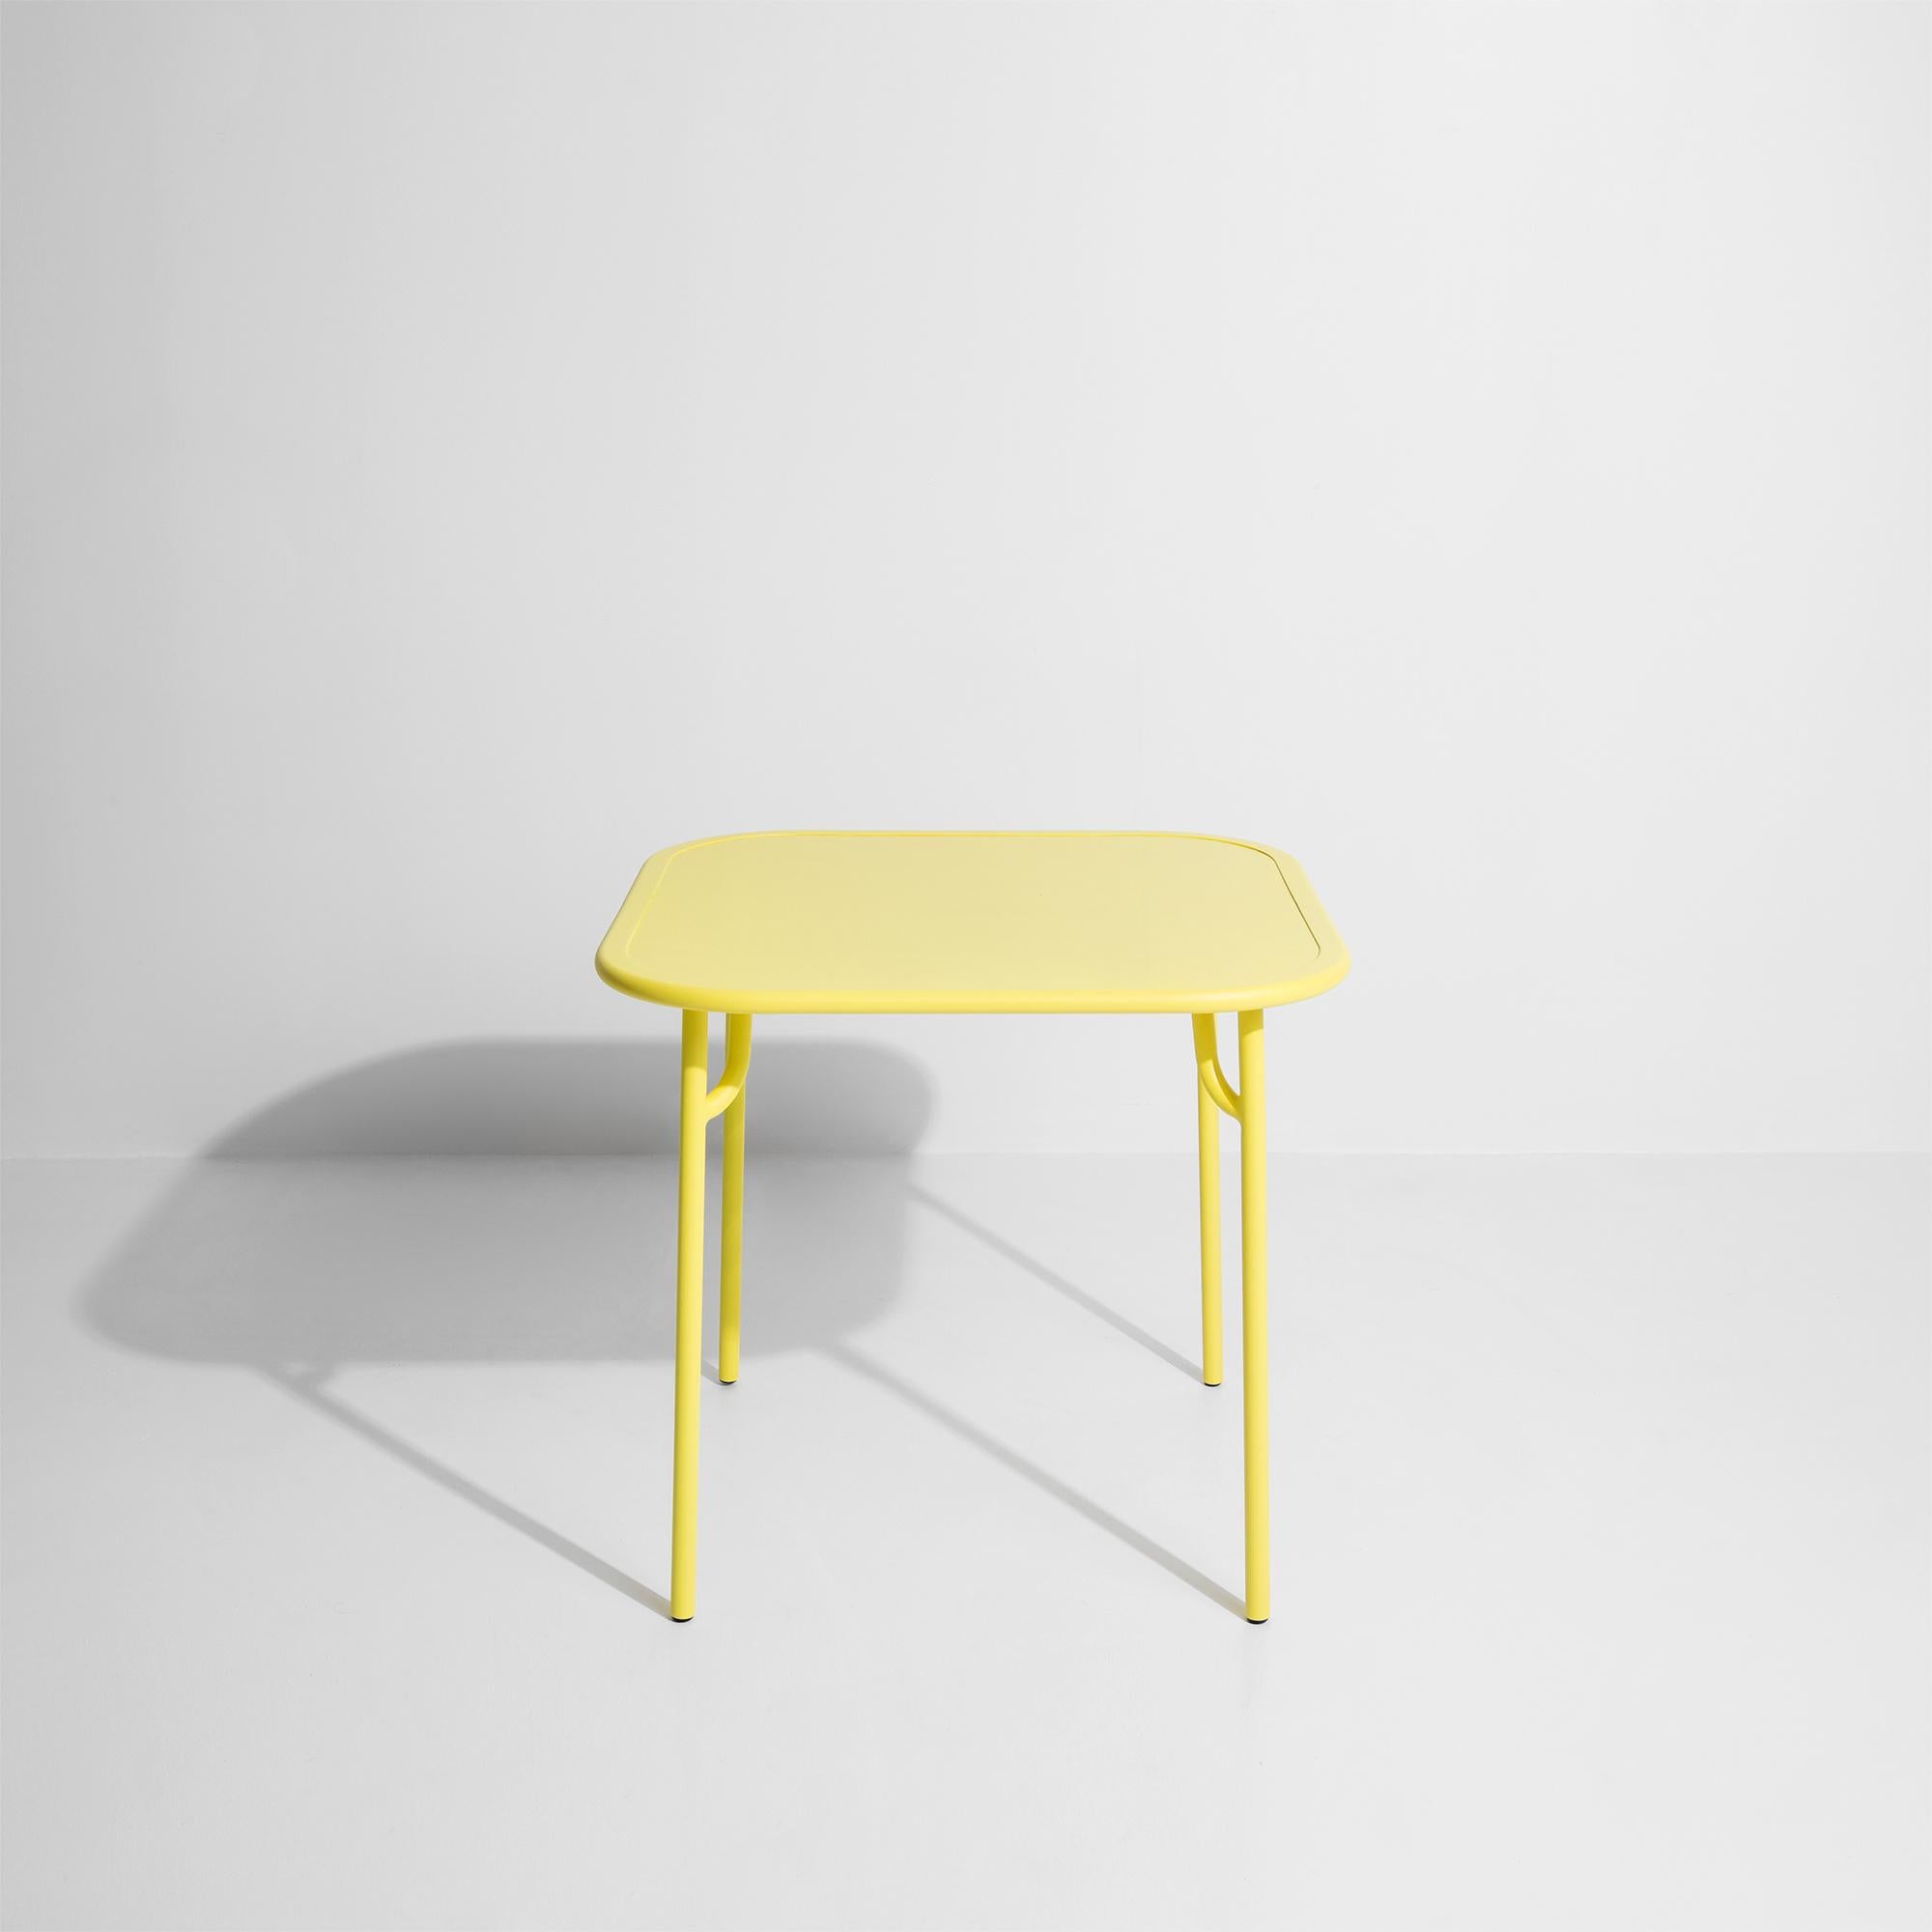 Petite Friture Week-End Plain Square Dining Table in Yellow Aluminium, 2017 In New Condition For Sale In Brooklyn, NY